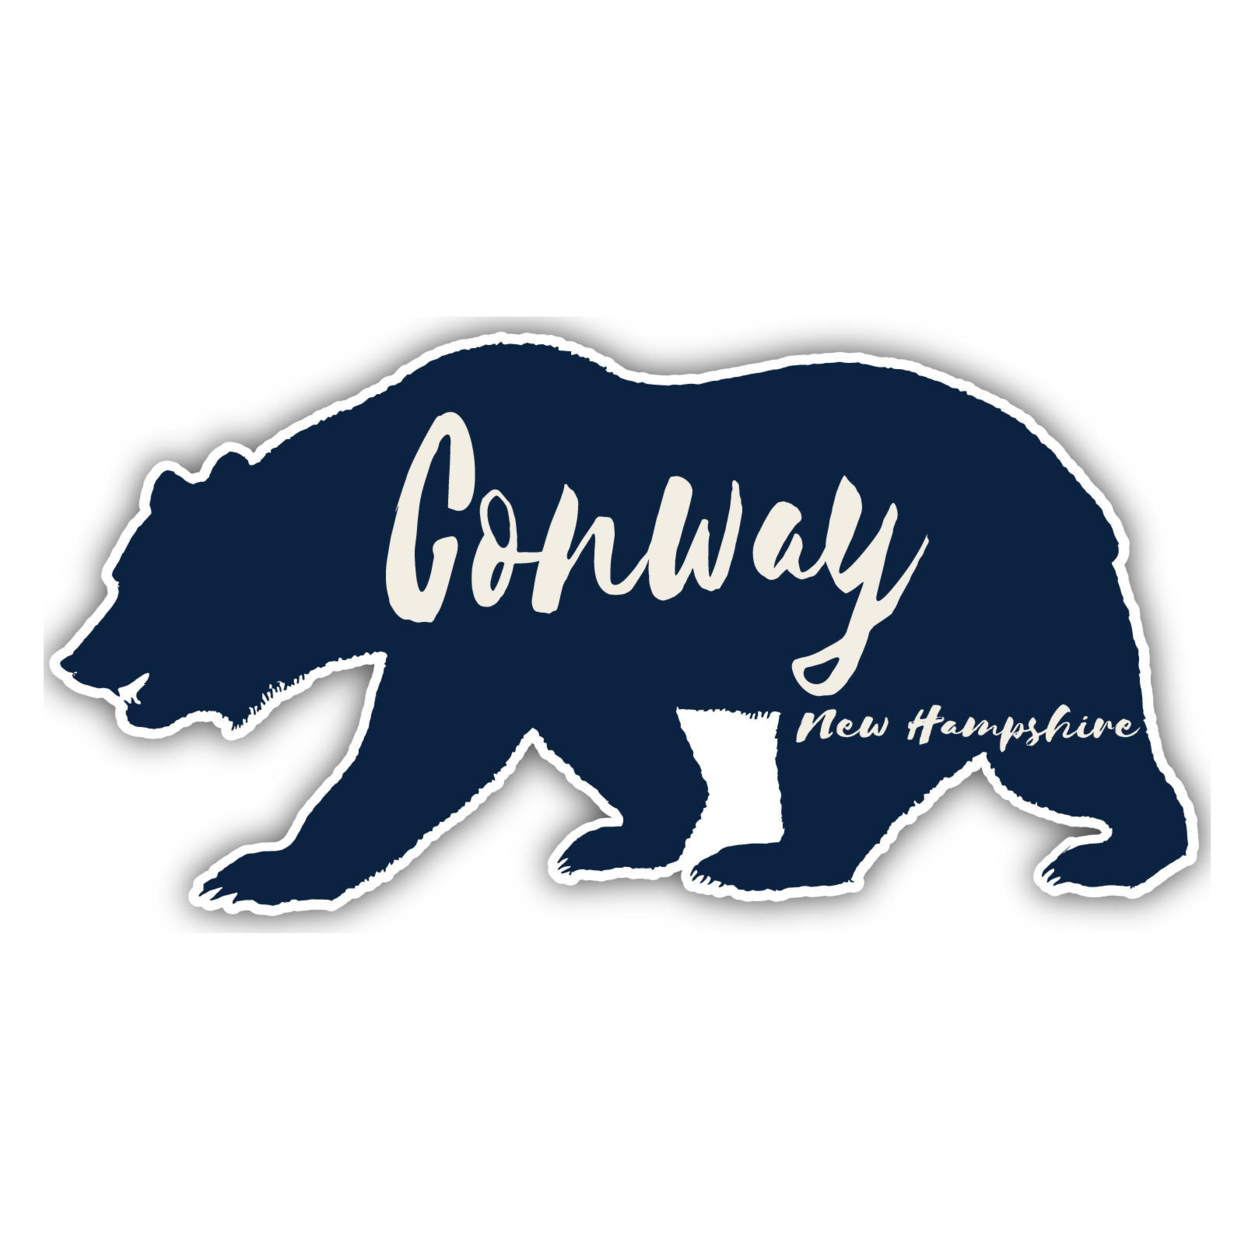 Conway New Hampshire Souvenir Decorative Stickers (Choose Theme And Size) - Single Unit, 2-Inch, Bear